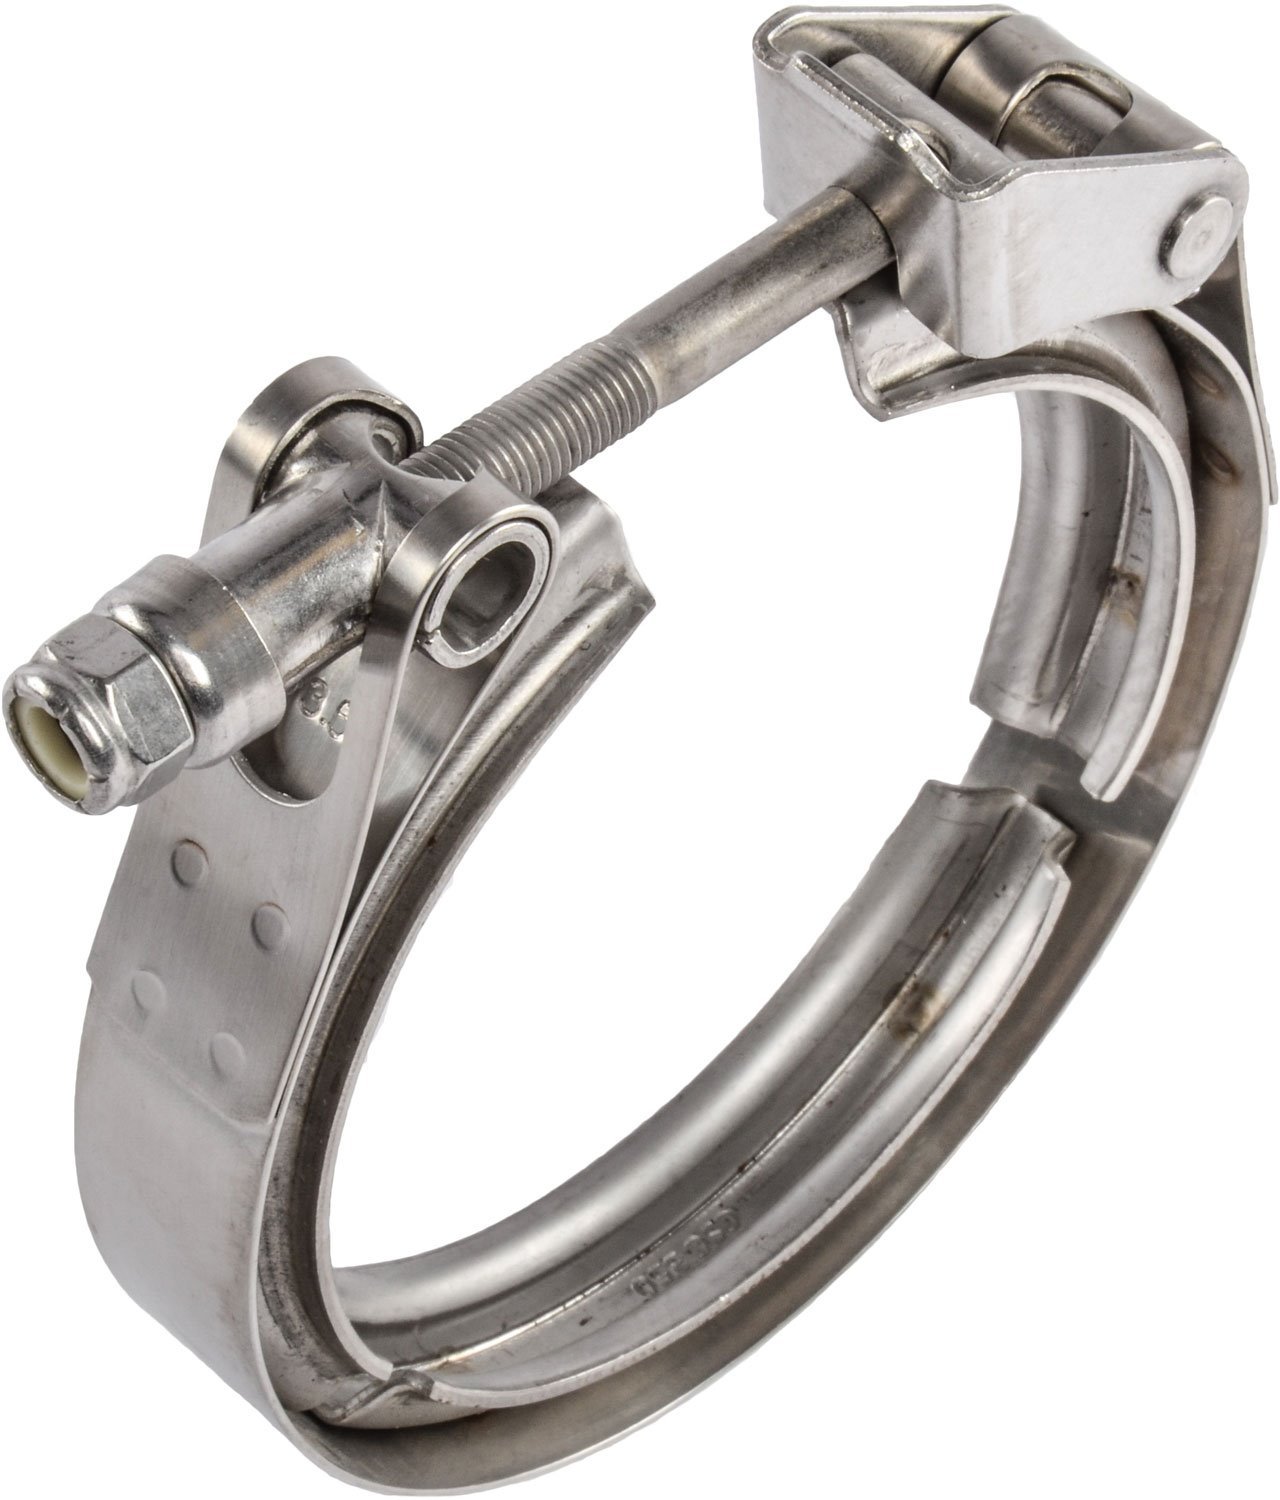 Stainless Steel Quick Release V-Band Clamp 3.500 in.